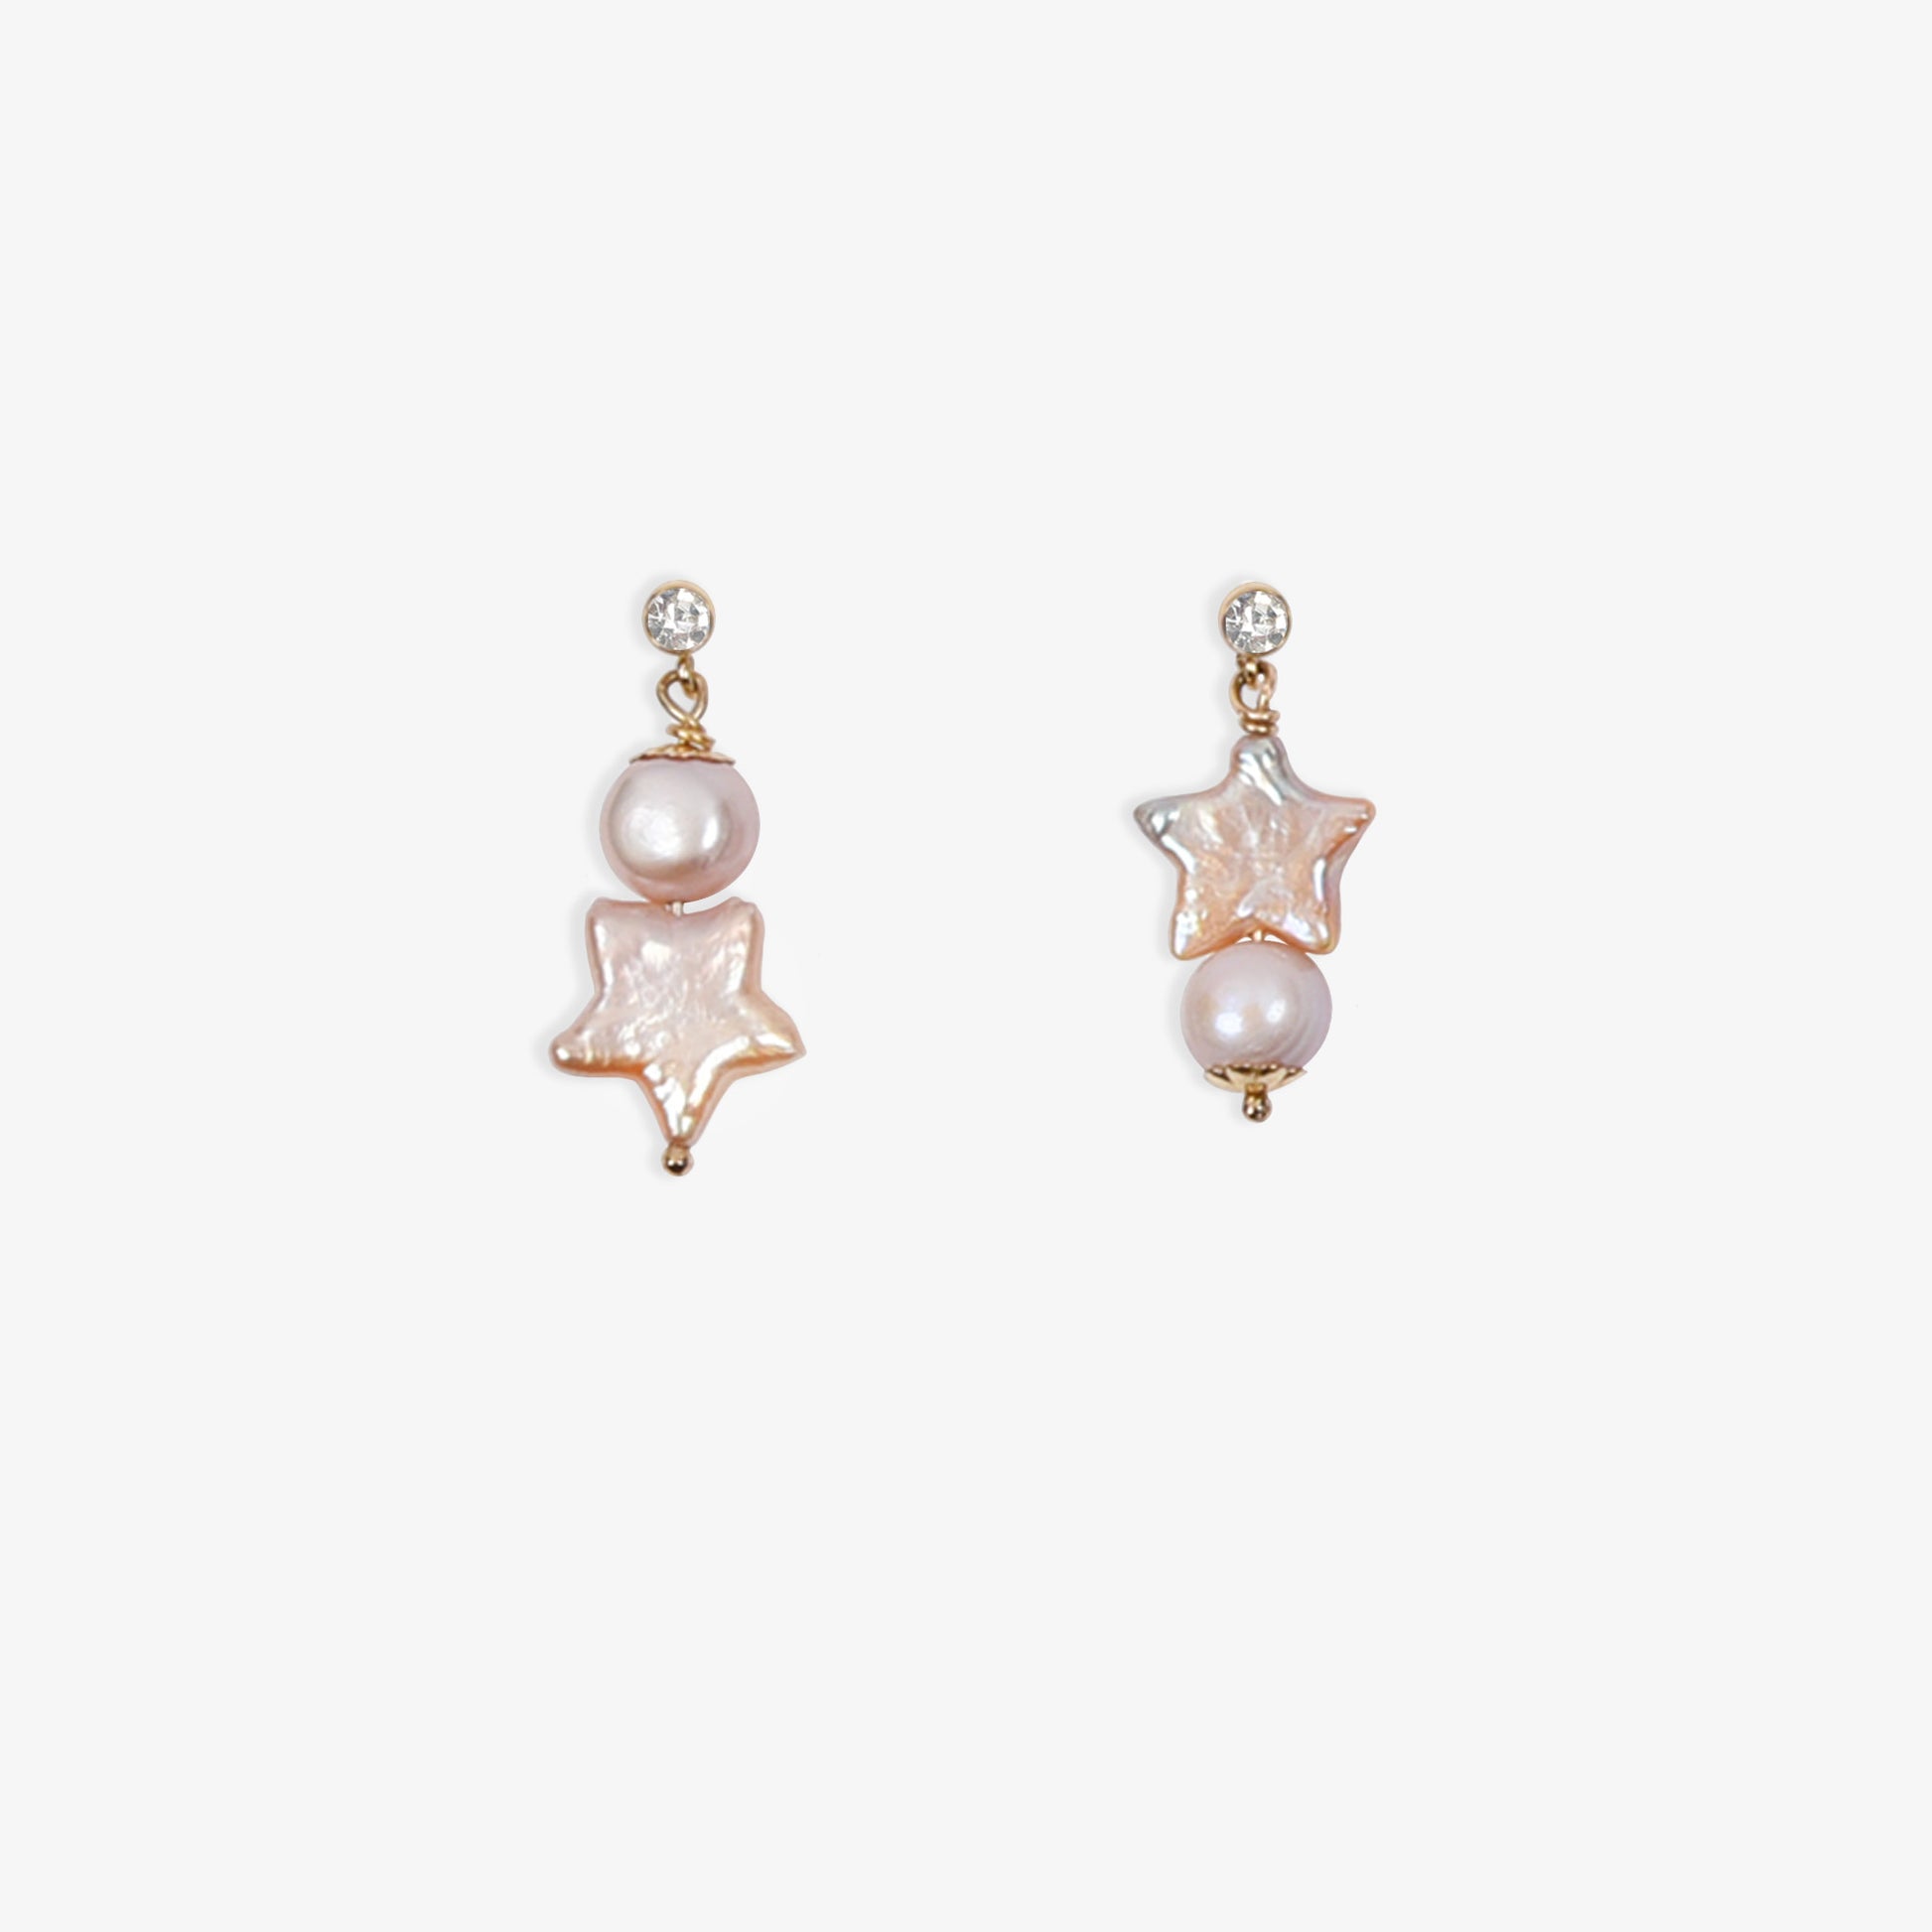 twinkle star stud earrings, light pink star shaped pearl and round pearl drop earring on topaz stud